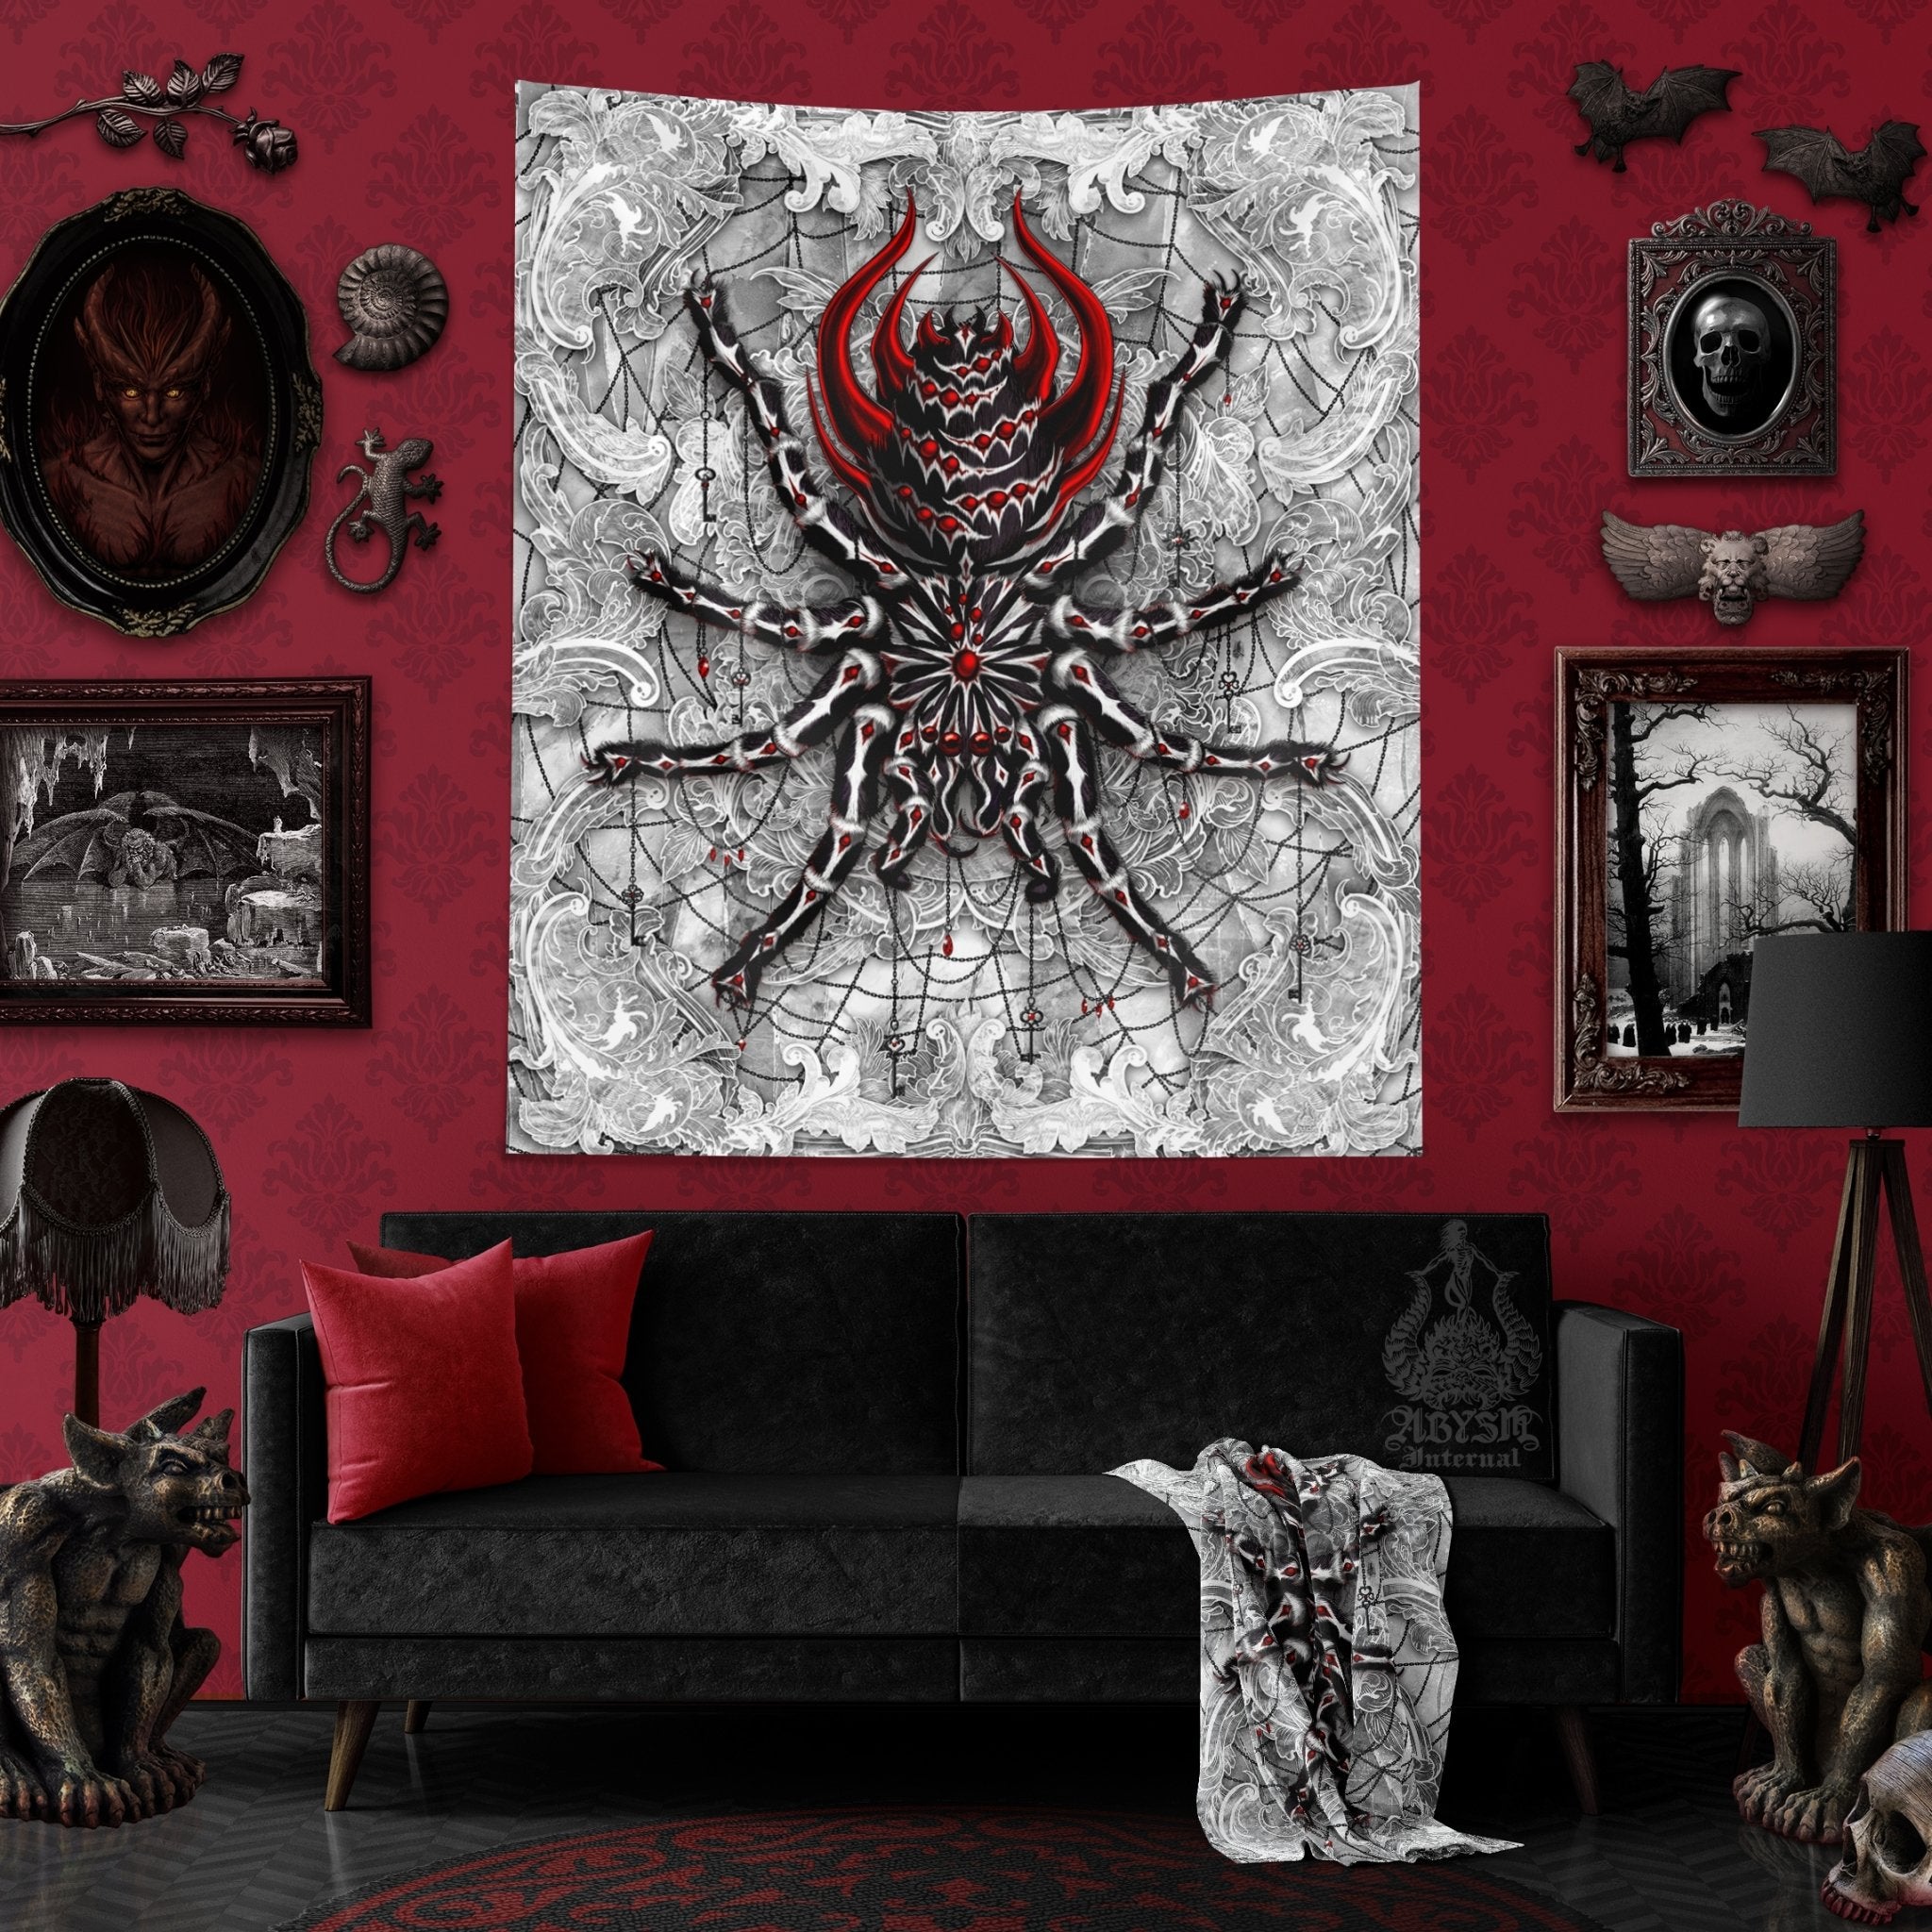 Spider Tapestry, White Goth Wall Hanging, Gothic Home Decor, Tarantula Art Print - Stone Red - Abysm Internal